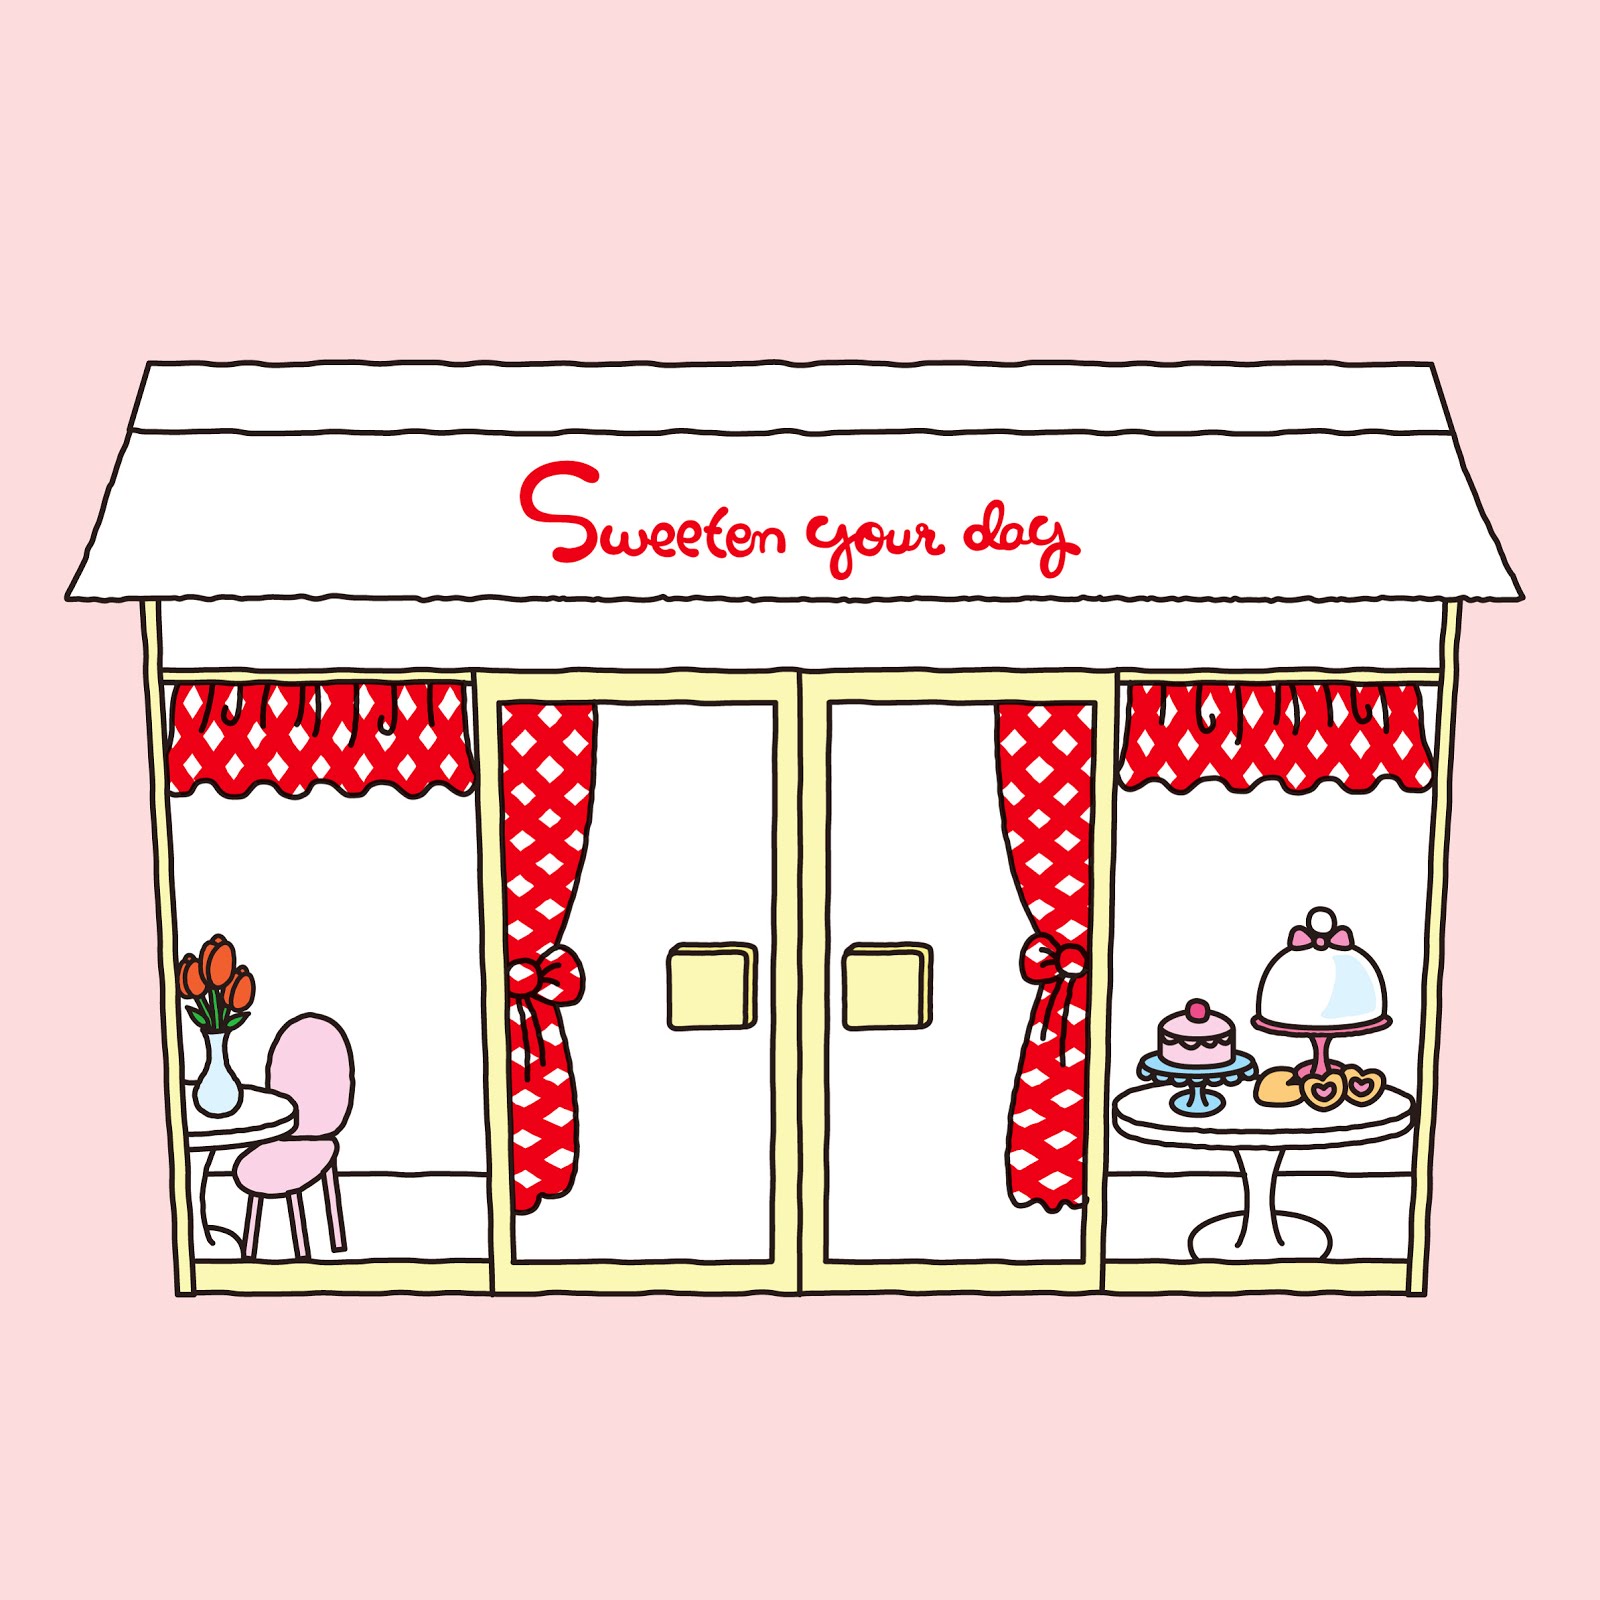 Sweeten your day shop HOME PAGE